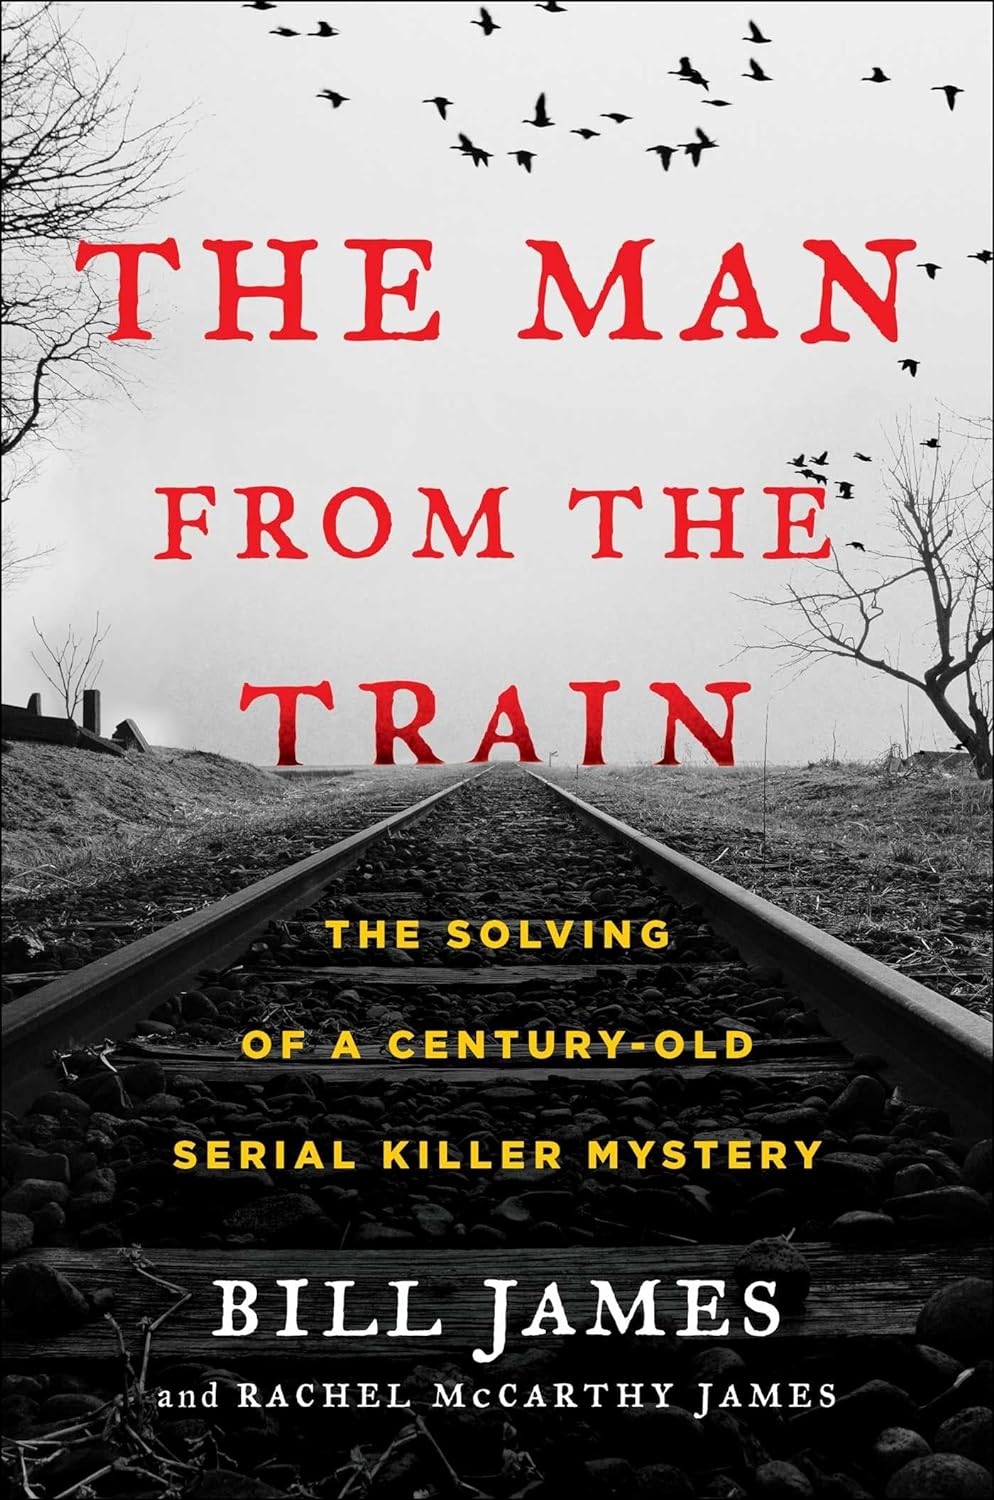 Image for "The Man from the Train"